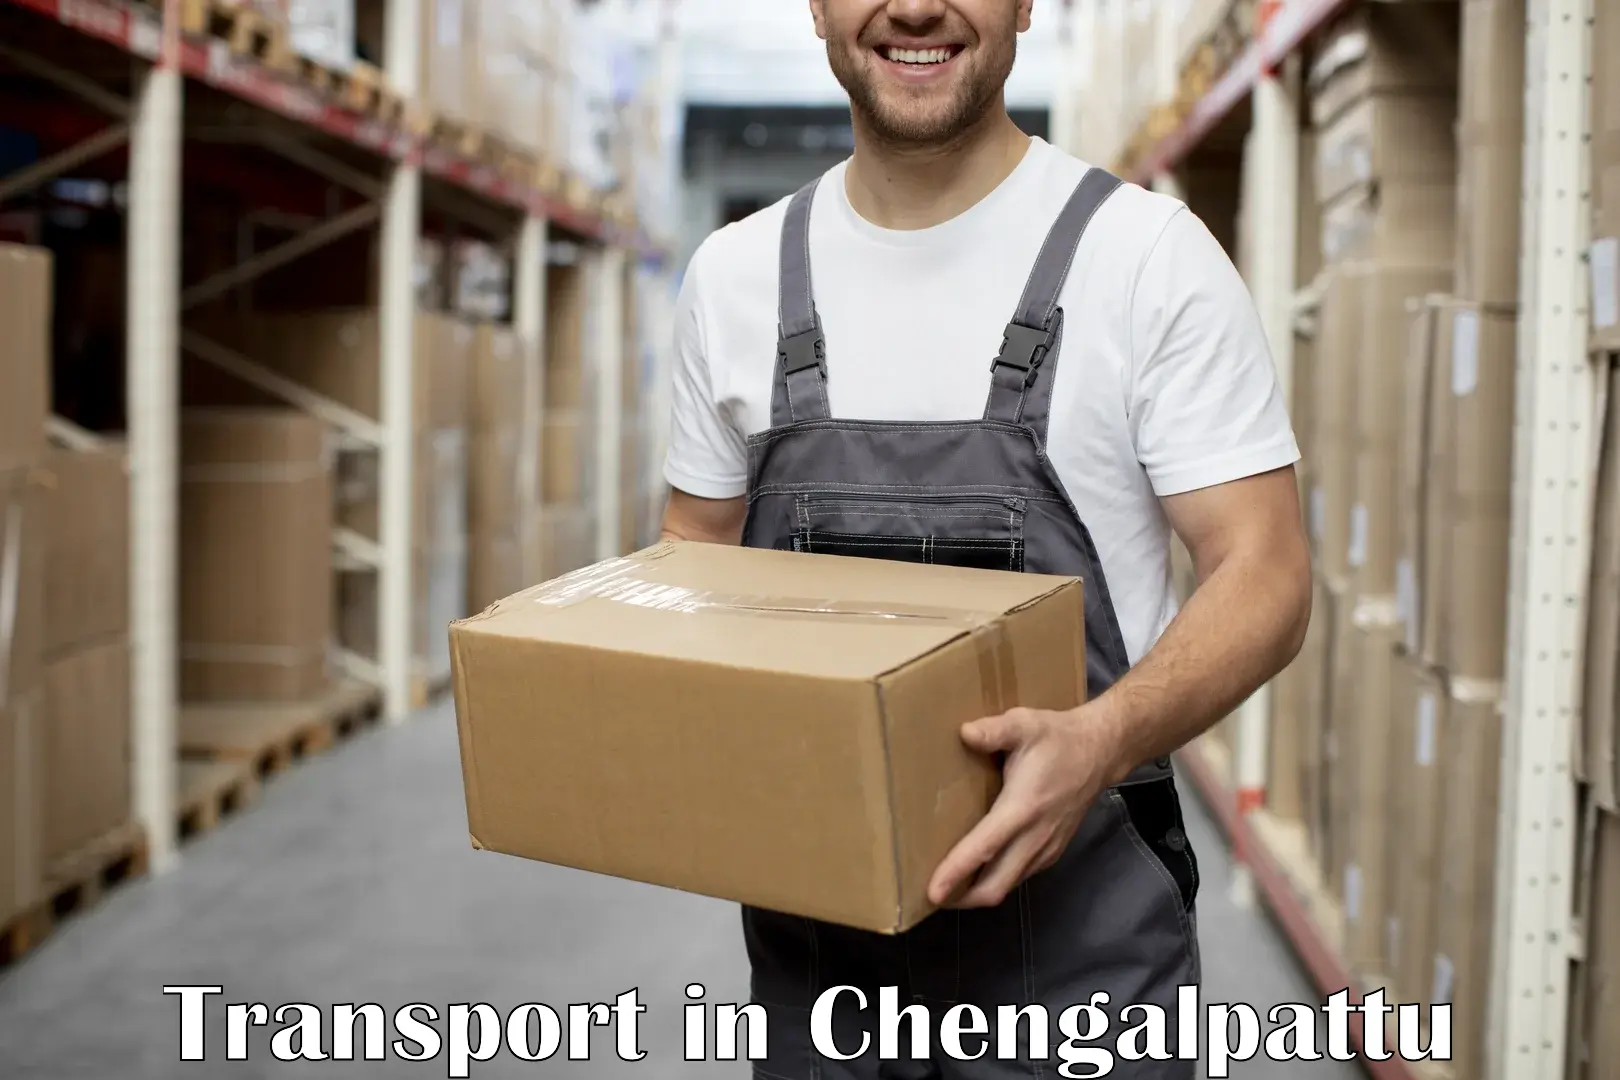 Shipping services in Chengalpattu